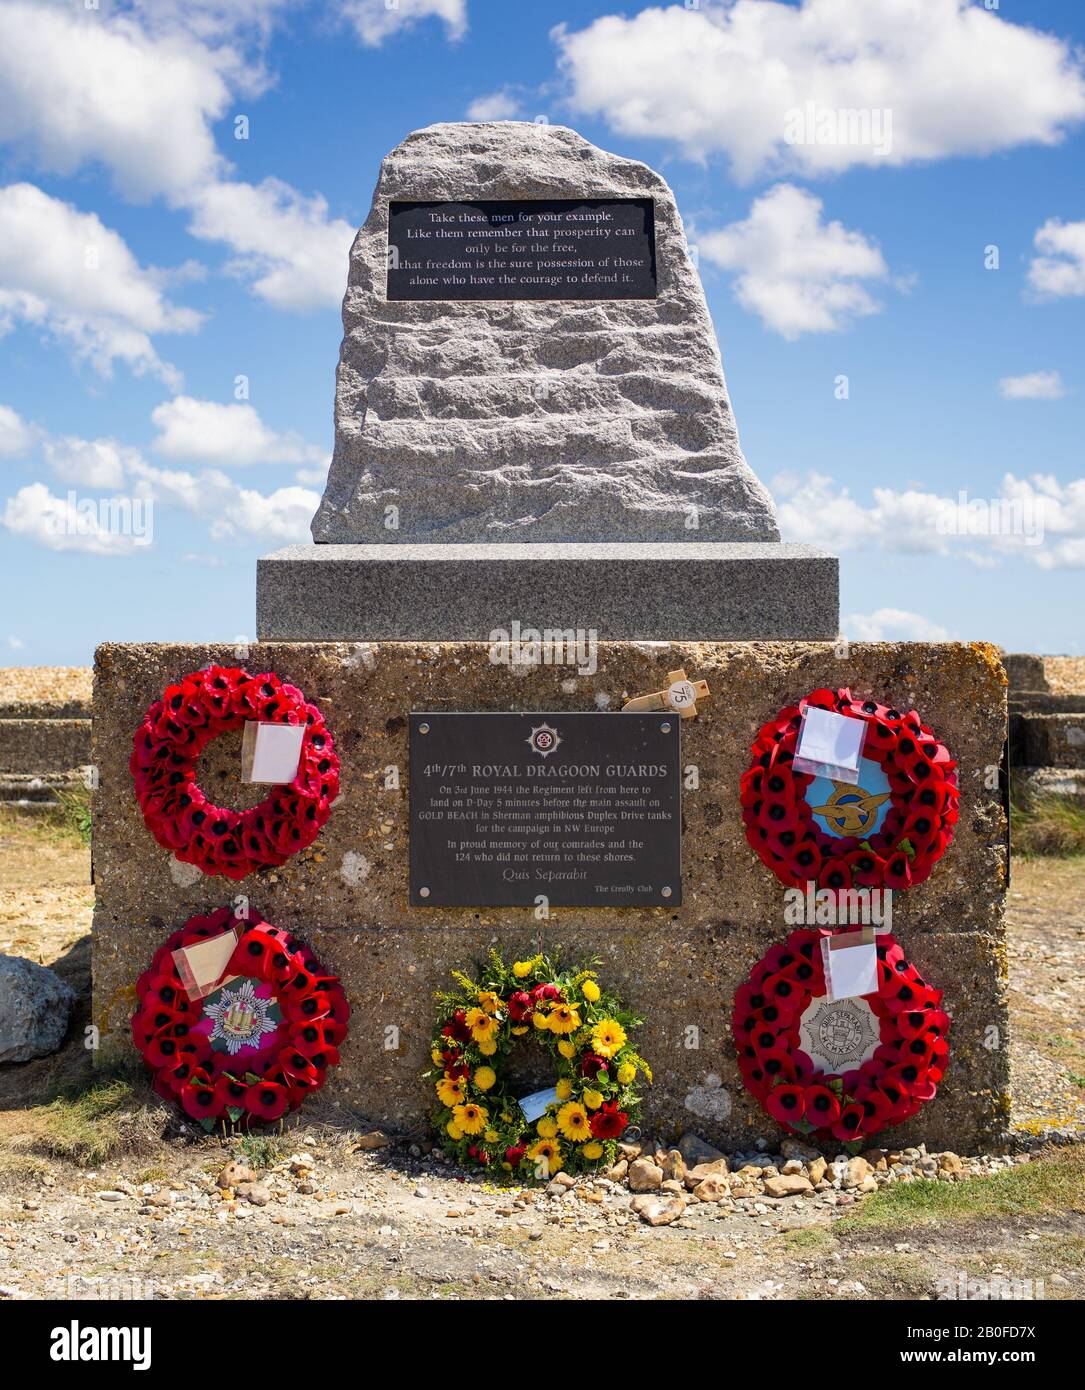 A memorial for the Royal Dragoon Guards at Lepe Beach Hampshire for their sacrifice during world war two in Operation Overlord. Stock Photo